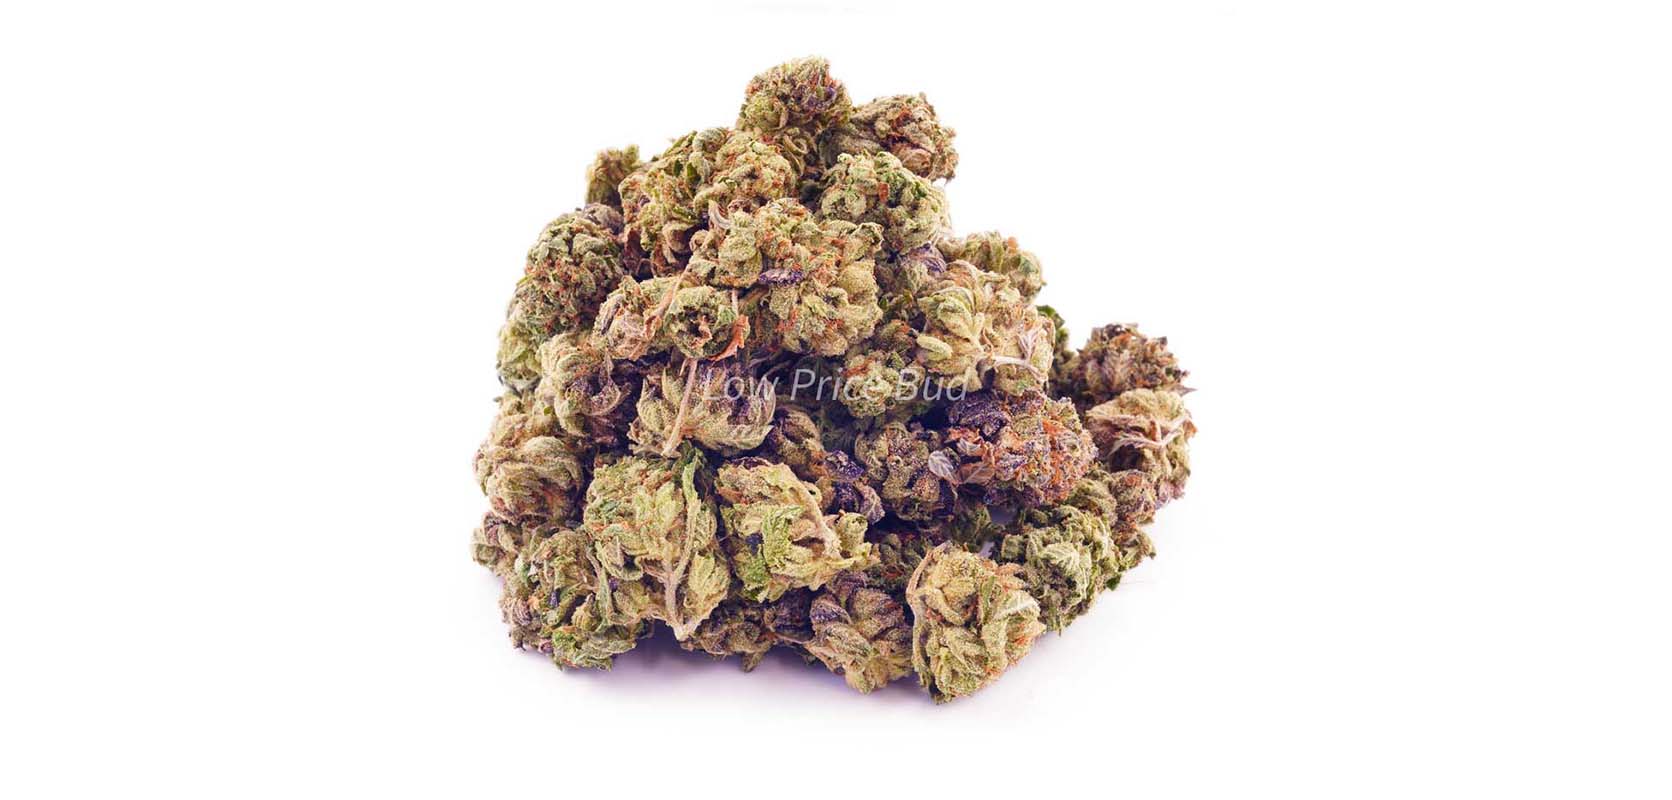 Blue Venom weed online Canada budget buds and cheap canna from Low Price Bud online dispensary weed store.